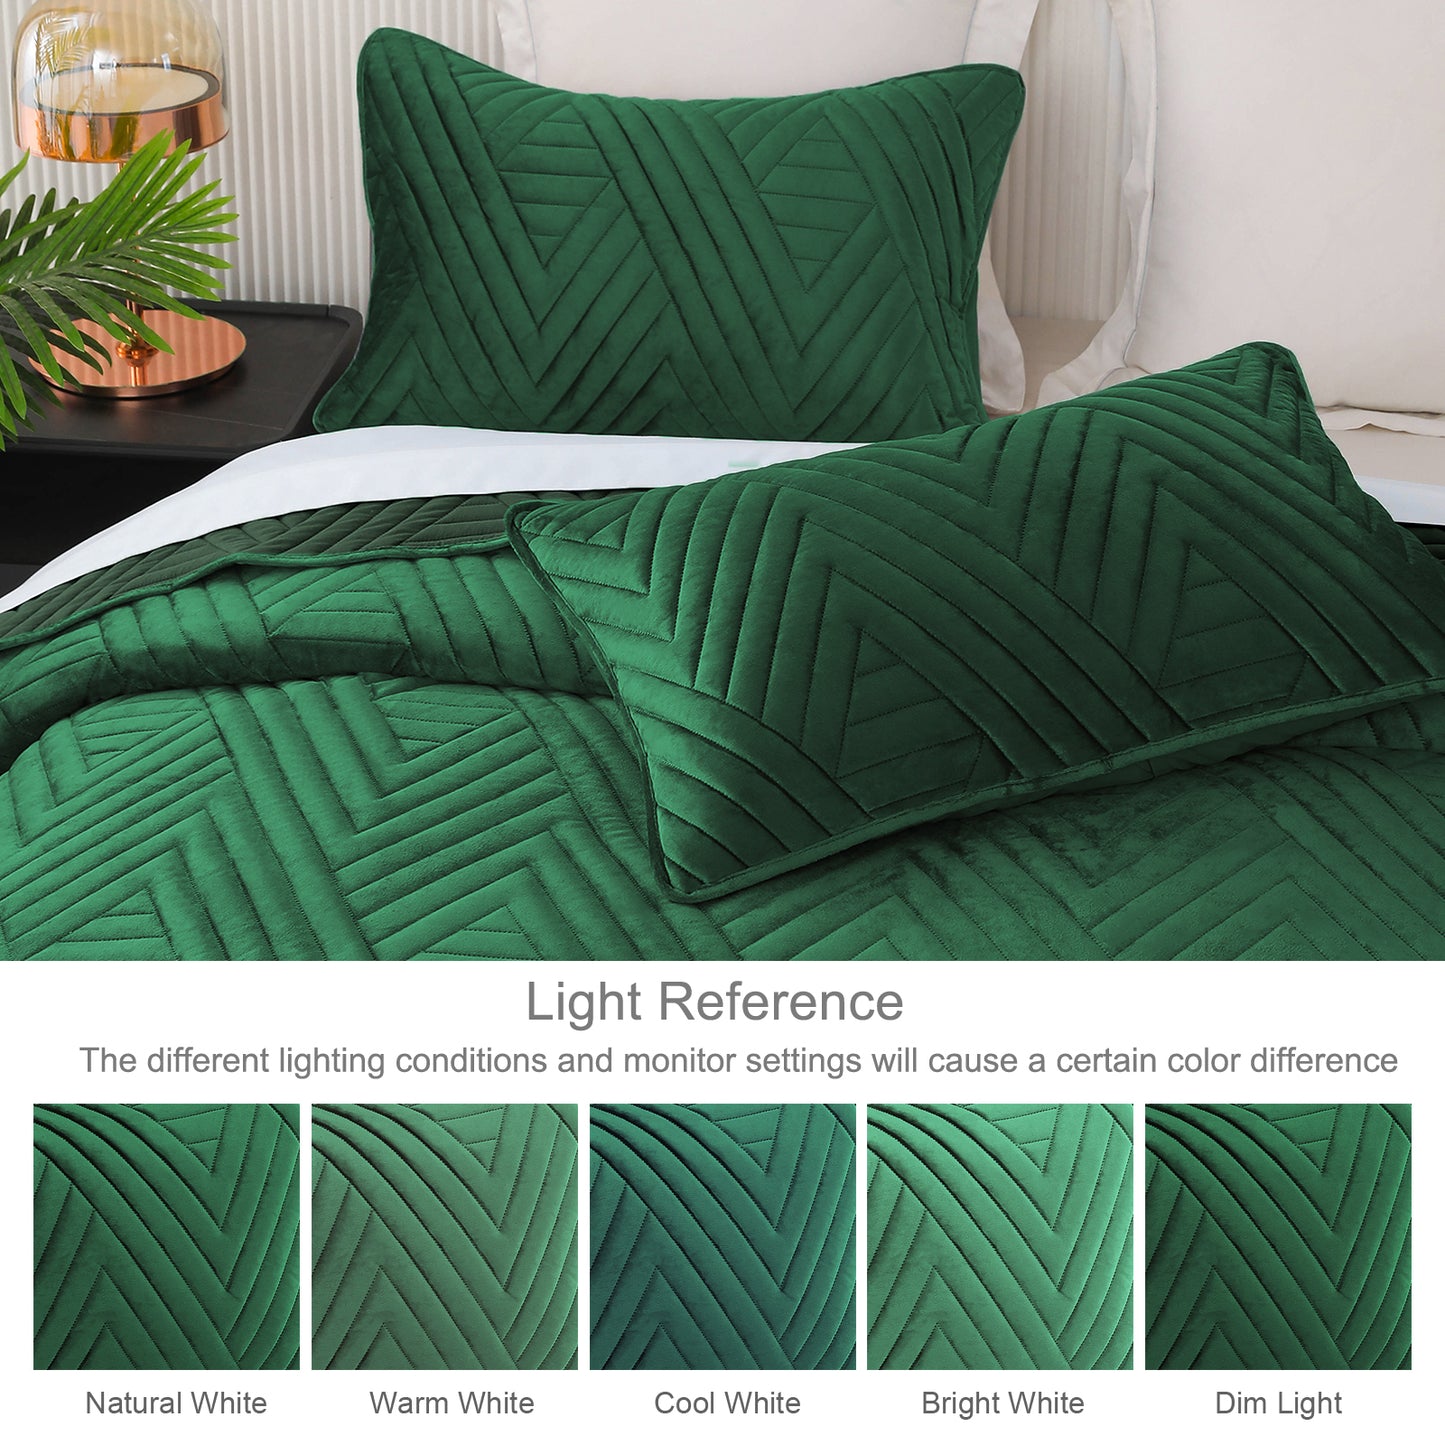 Exclusivo Mezcla Super Plush Velvet Quilt King Size with Pillow Shams, Luxury Soft Reversible 3 Piece Bedspreads Coverlet Comforter Set for All Seasons, Lightweight and Warm, Emerald Green